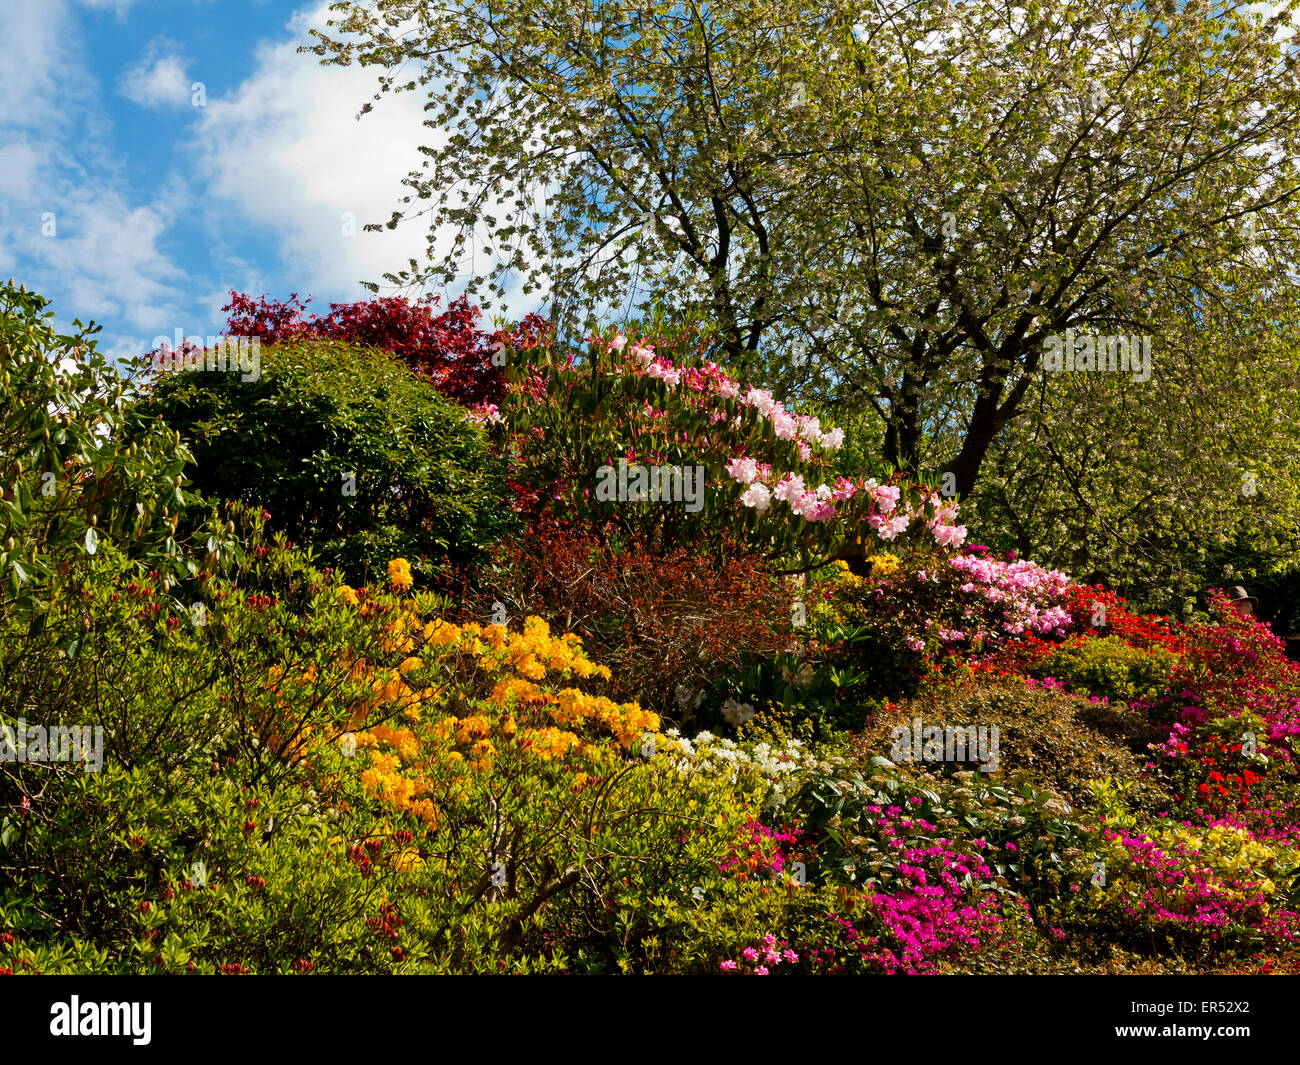 Rhododendrons in spring at Lea Gardens a popular tourist attraction near Matlock Derbyshire Dales Peak District England UK Stock Photo